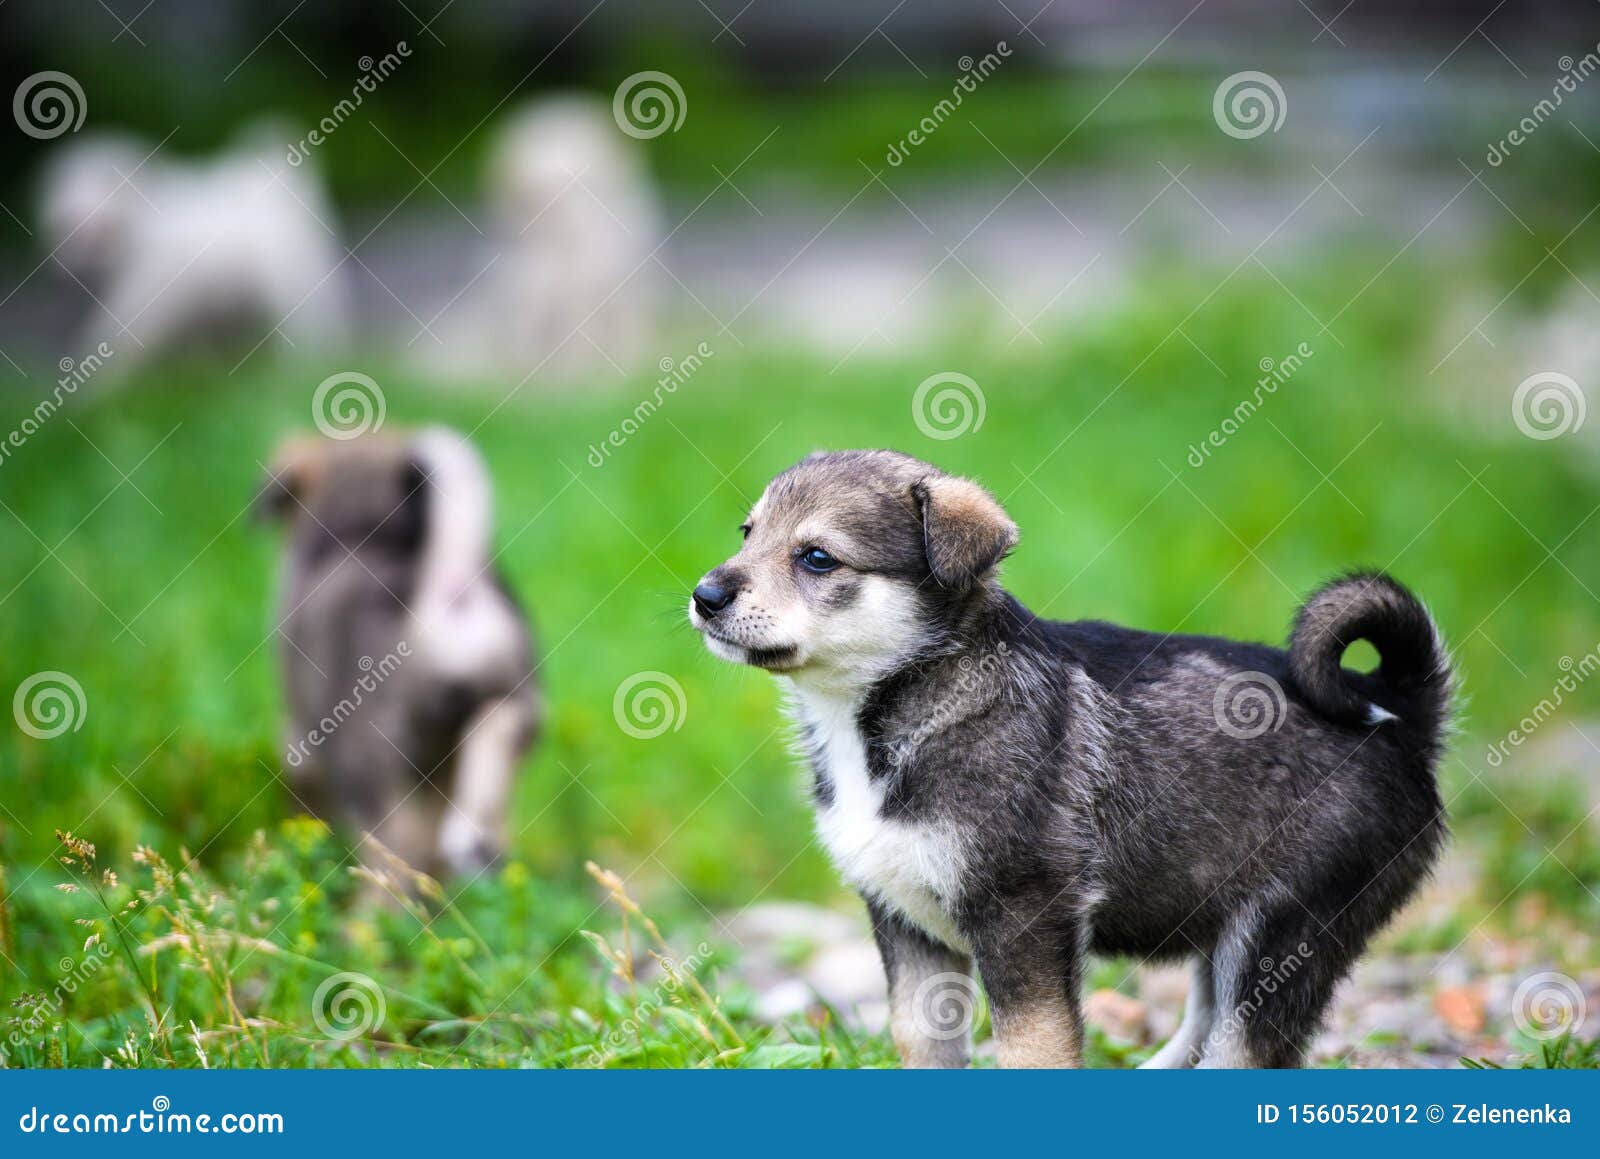 Cute puppy on green grass stock photo. Image of family ...